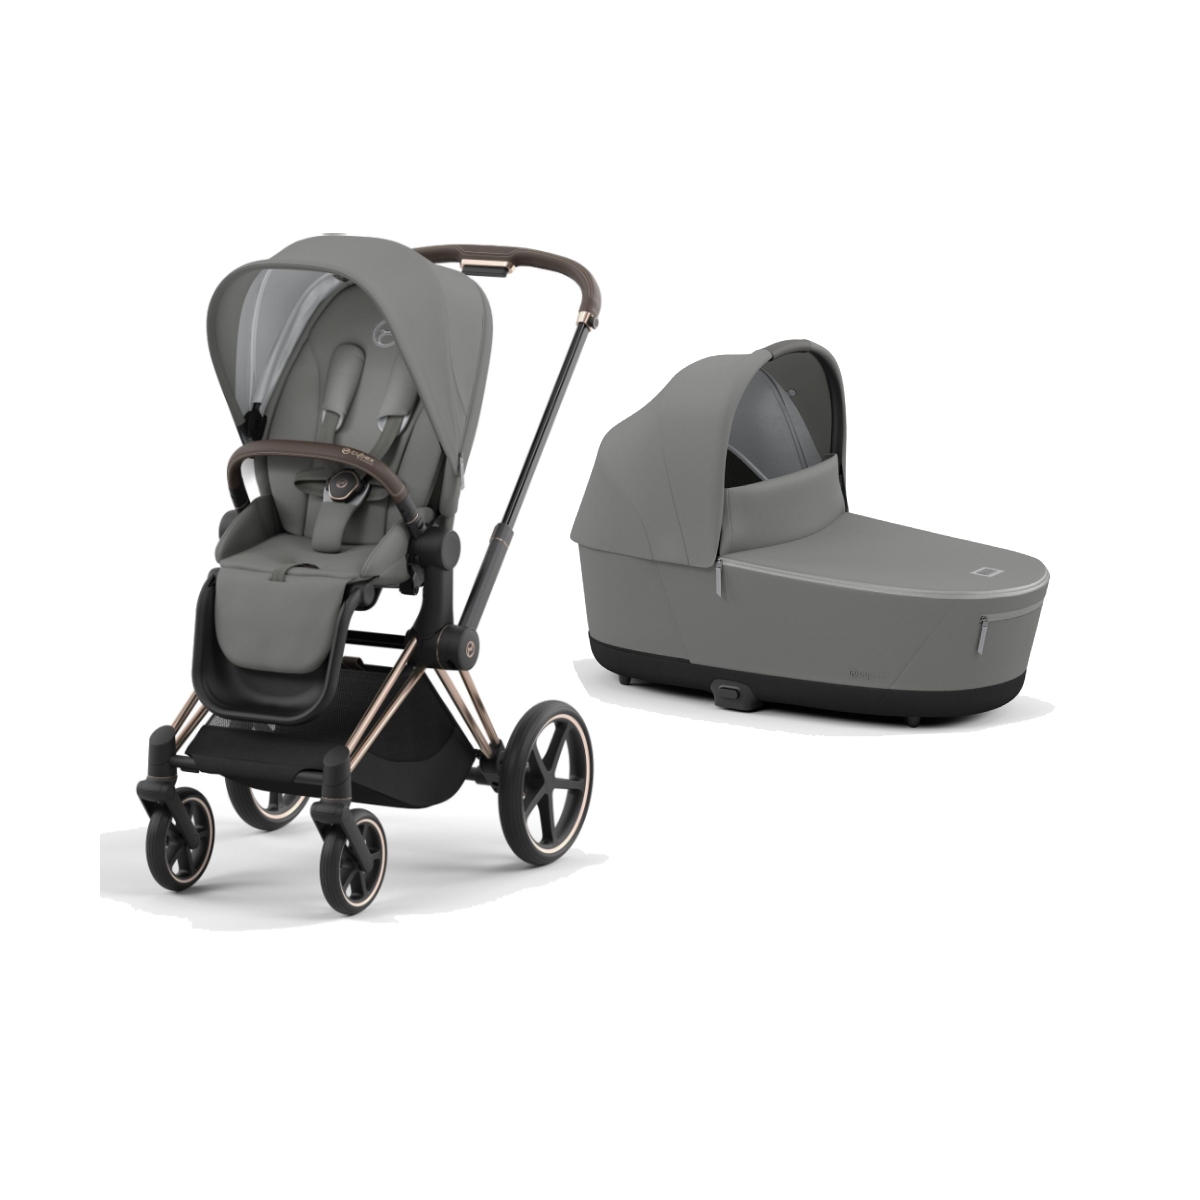 Cybex Priam Rose Gold Pushchair with Lux Carry Cot